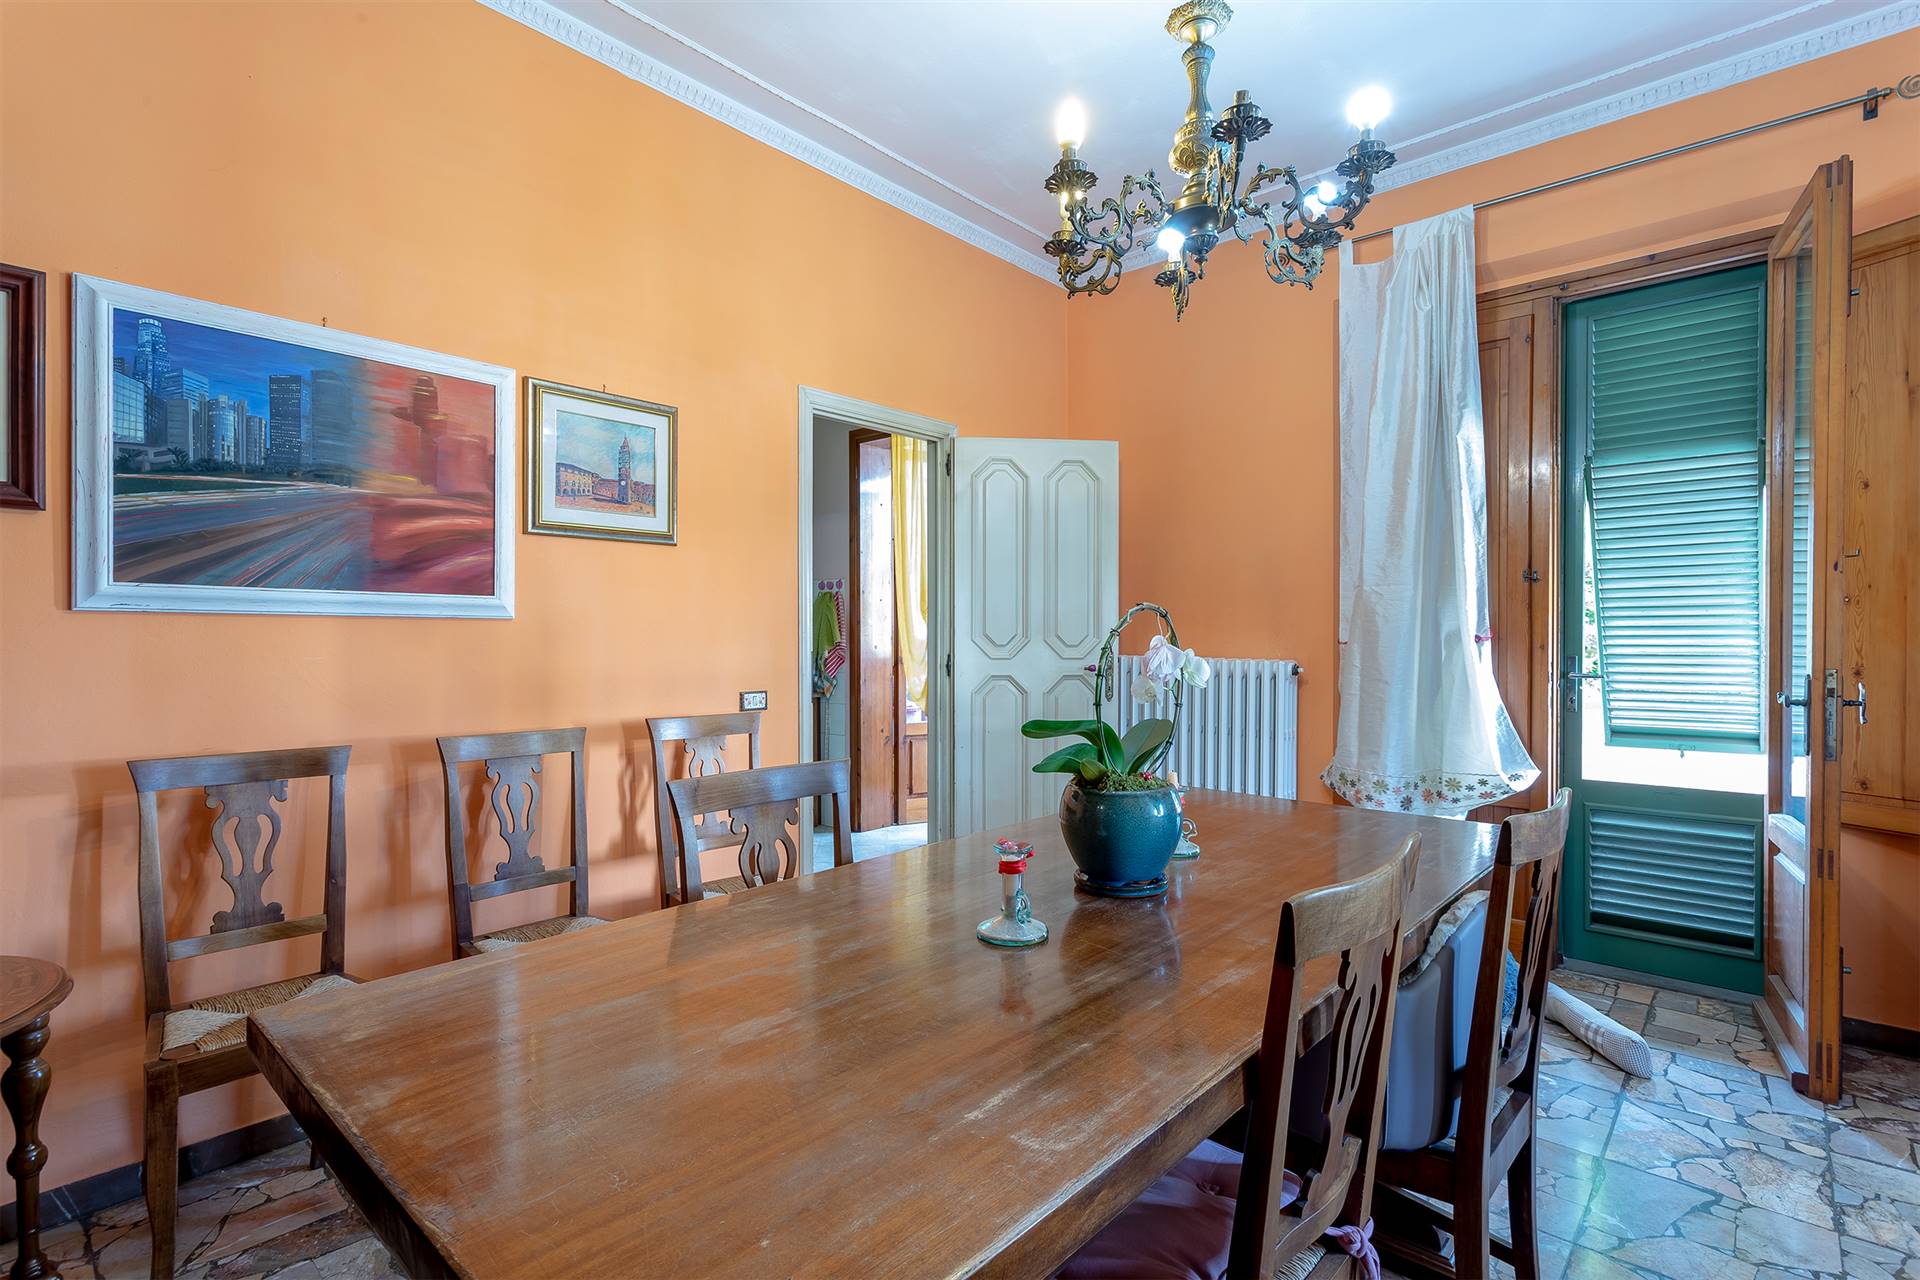 SANT'ANGELO A LECORE, CAMPI BISENZIO, Terraced house for sale of 282 Sq. mt., Habitable, Heating Individual heating system, Energetic class: G, 